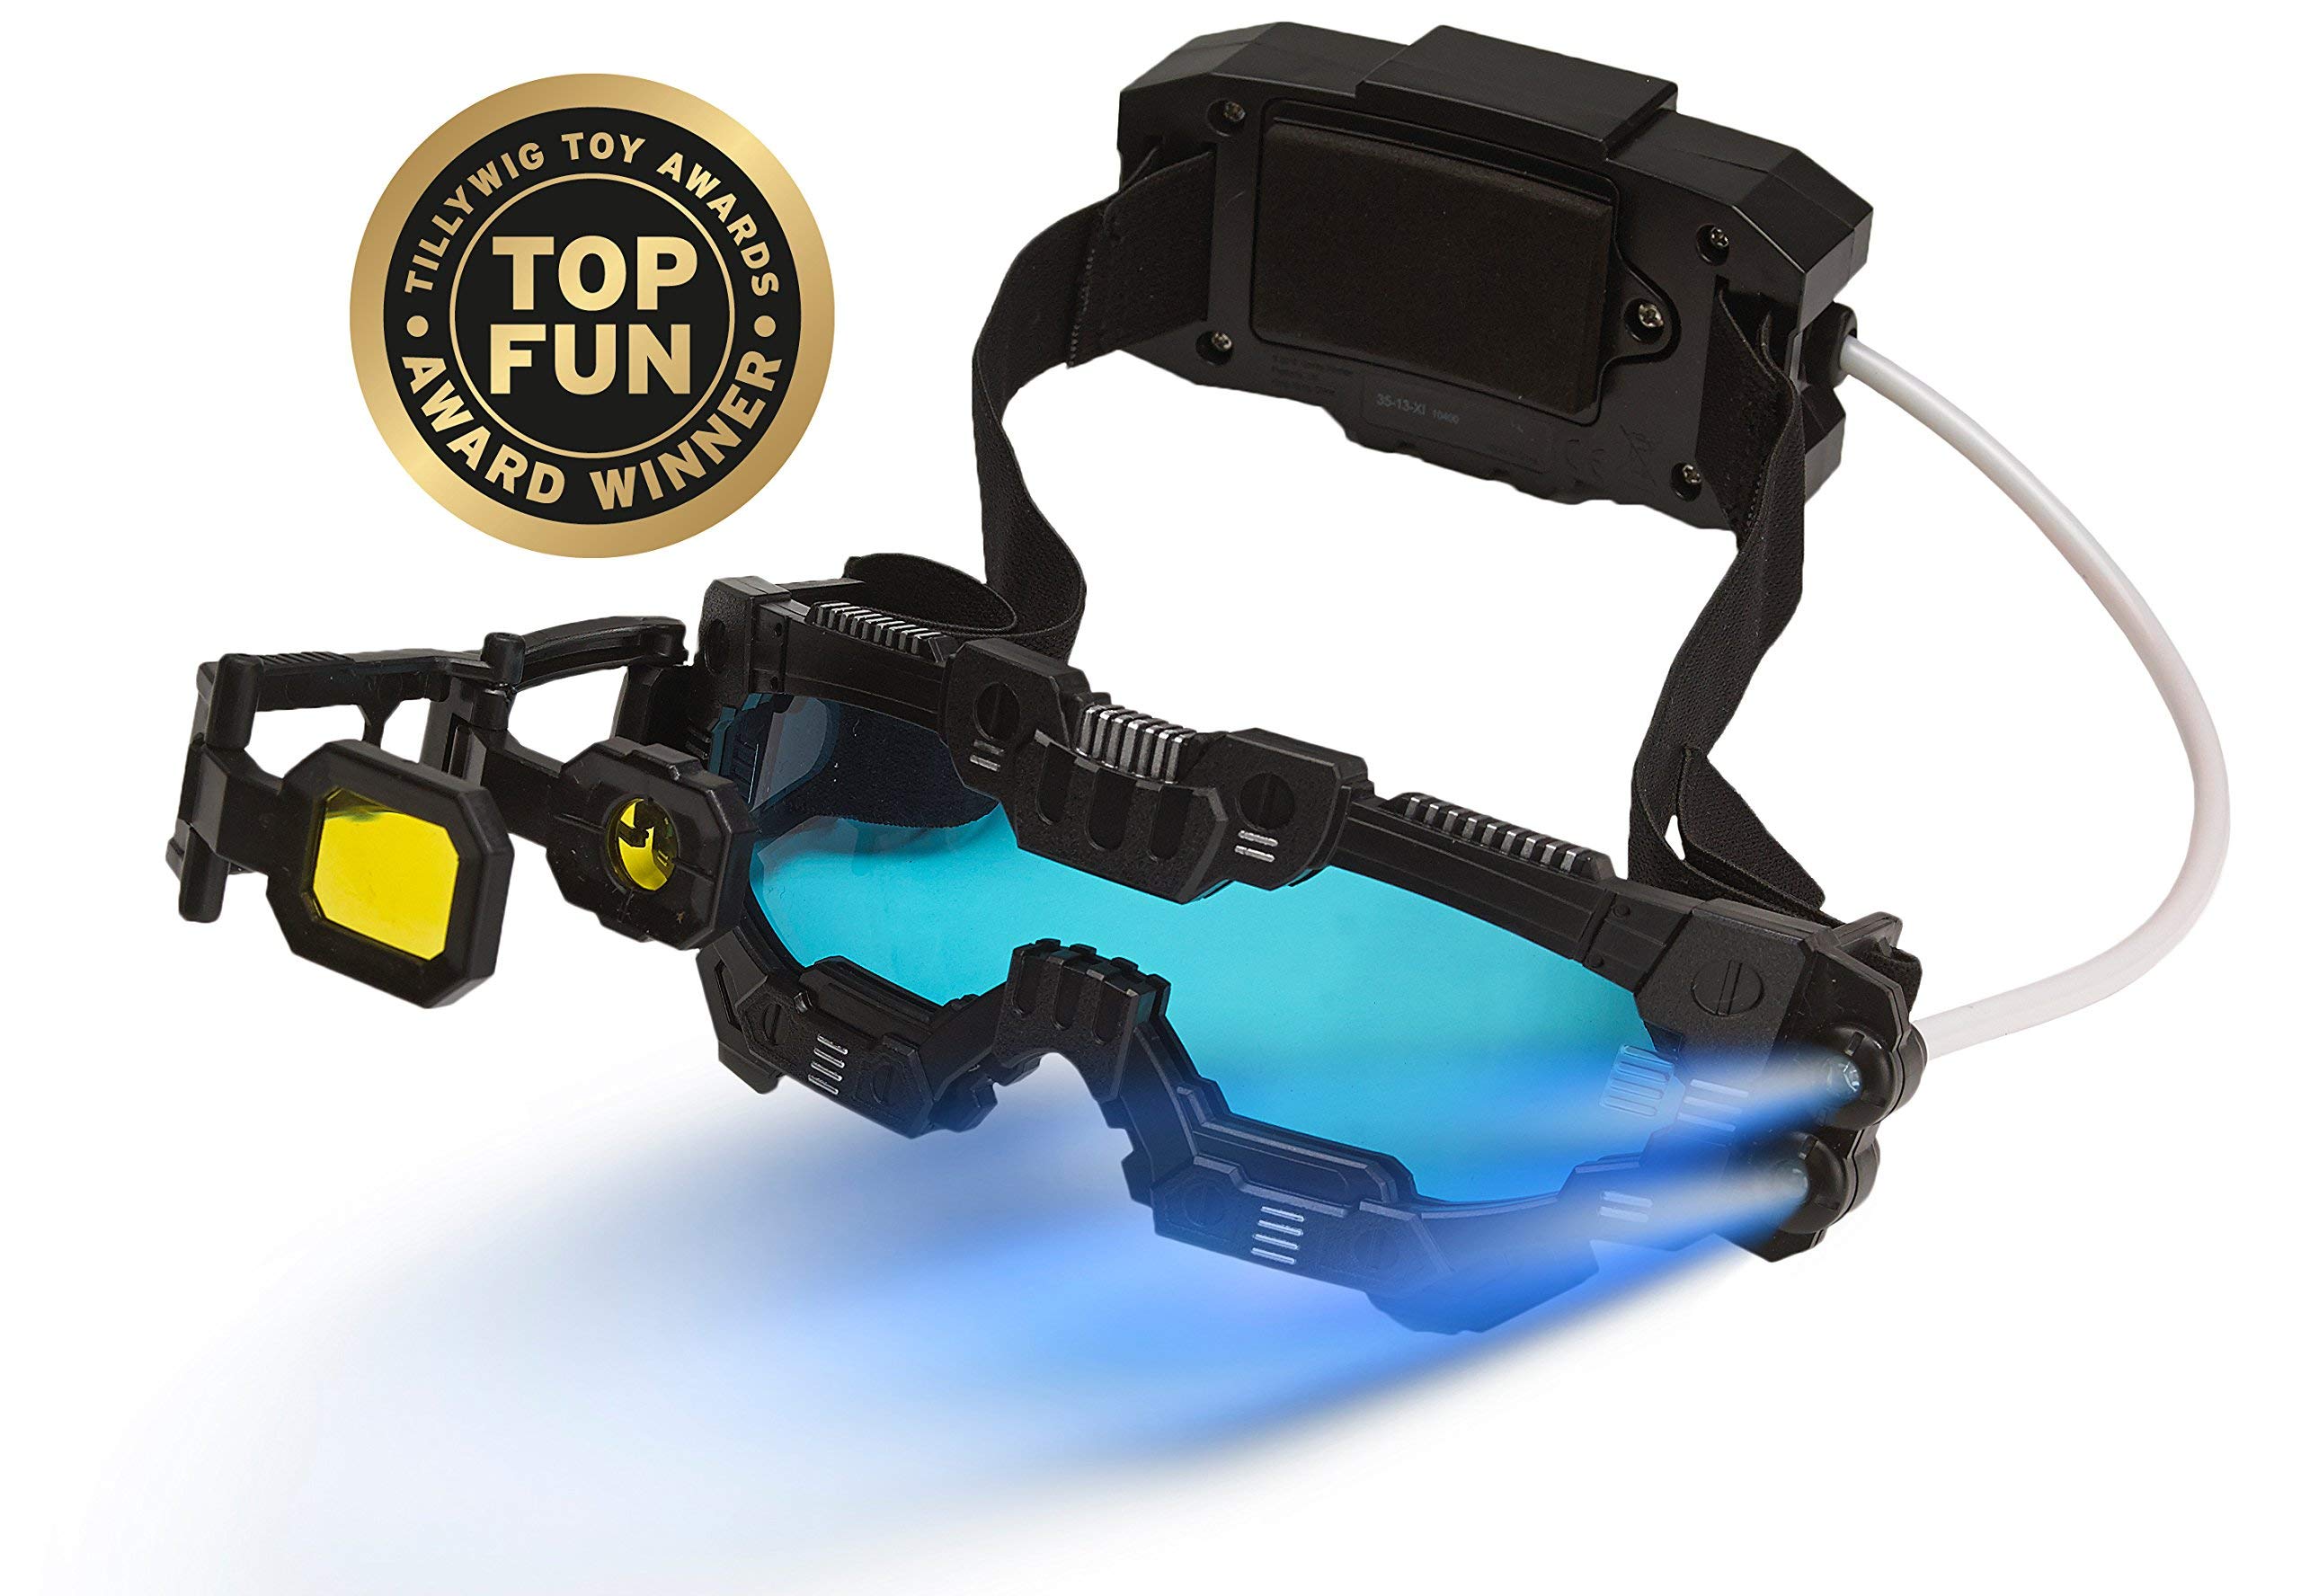 SpyX / Night Mission Goggles - Spy Kids Goggles Toy + LED Light Beams + Flip Out Scope. Adjustable Spy Lens/Glasses/Eyewear Toy Gadget for Junior Secret Agent Role Play in The Dark